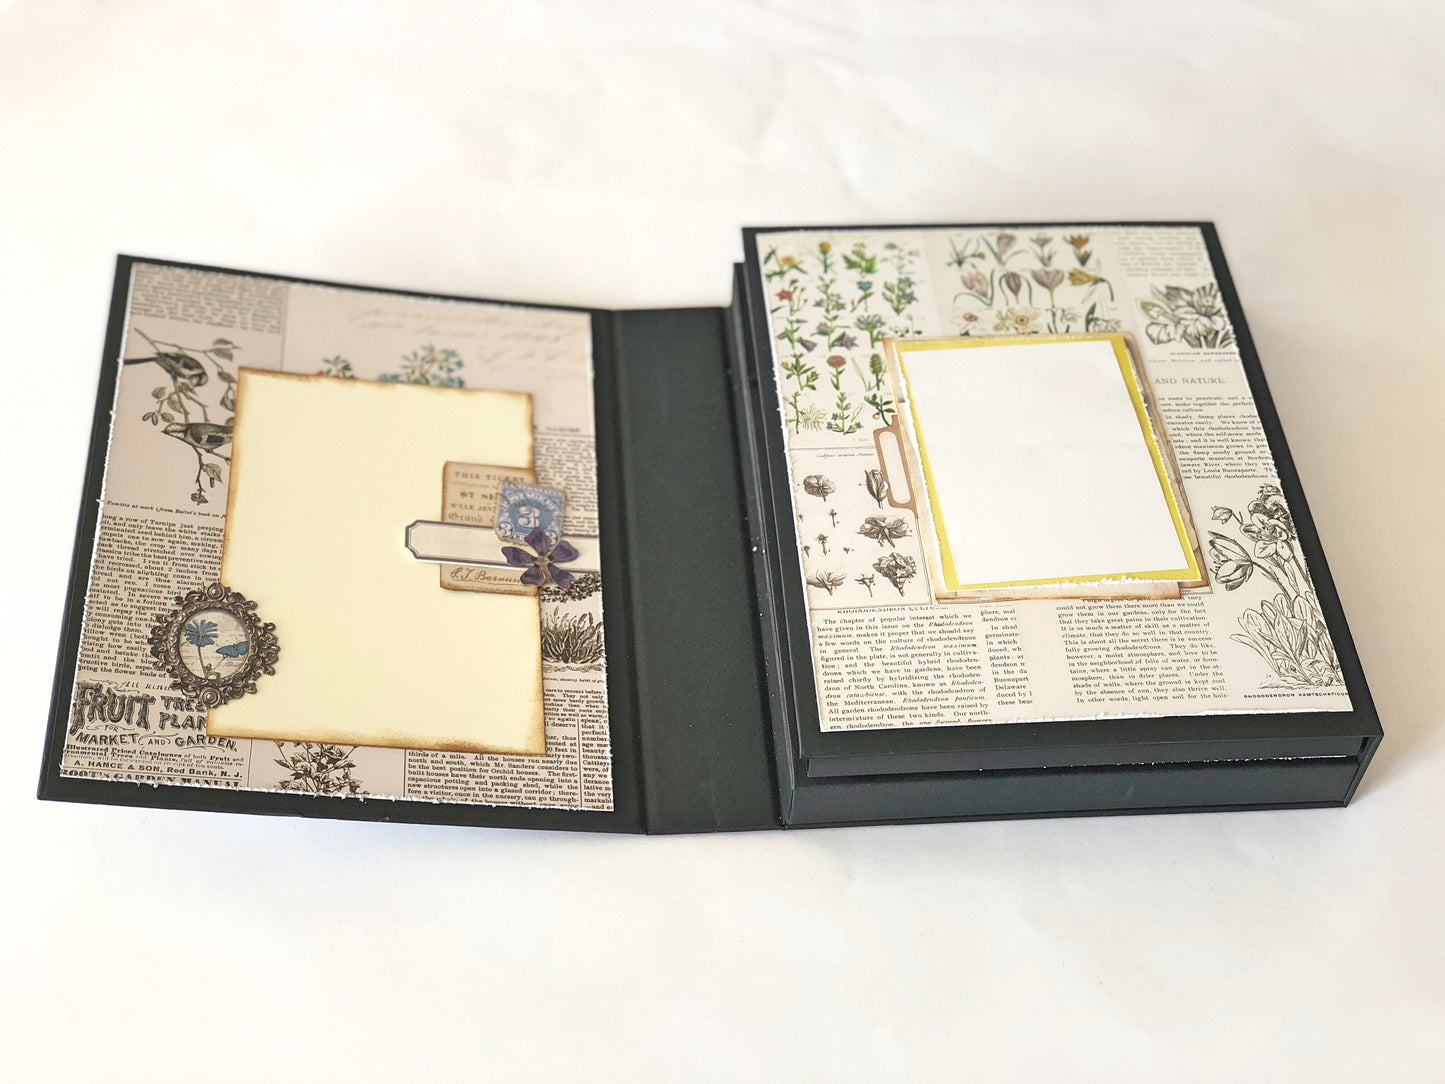 Scrapbooking Photo Album "Captured Photographs", Family heirloom gift, Black Interactive Photo Book Folio with Pockets and Journaling spots